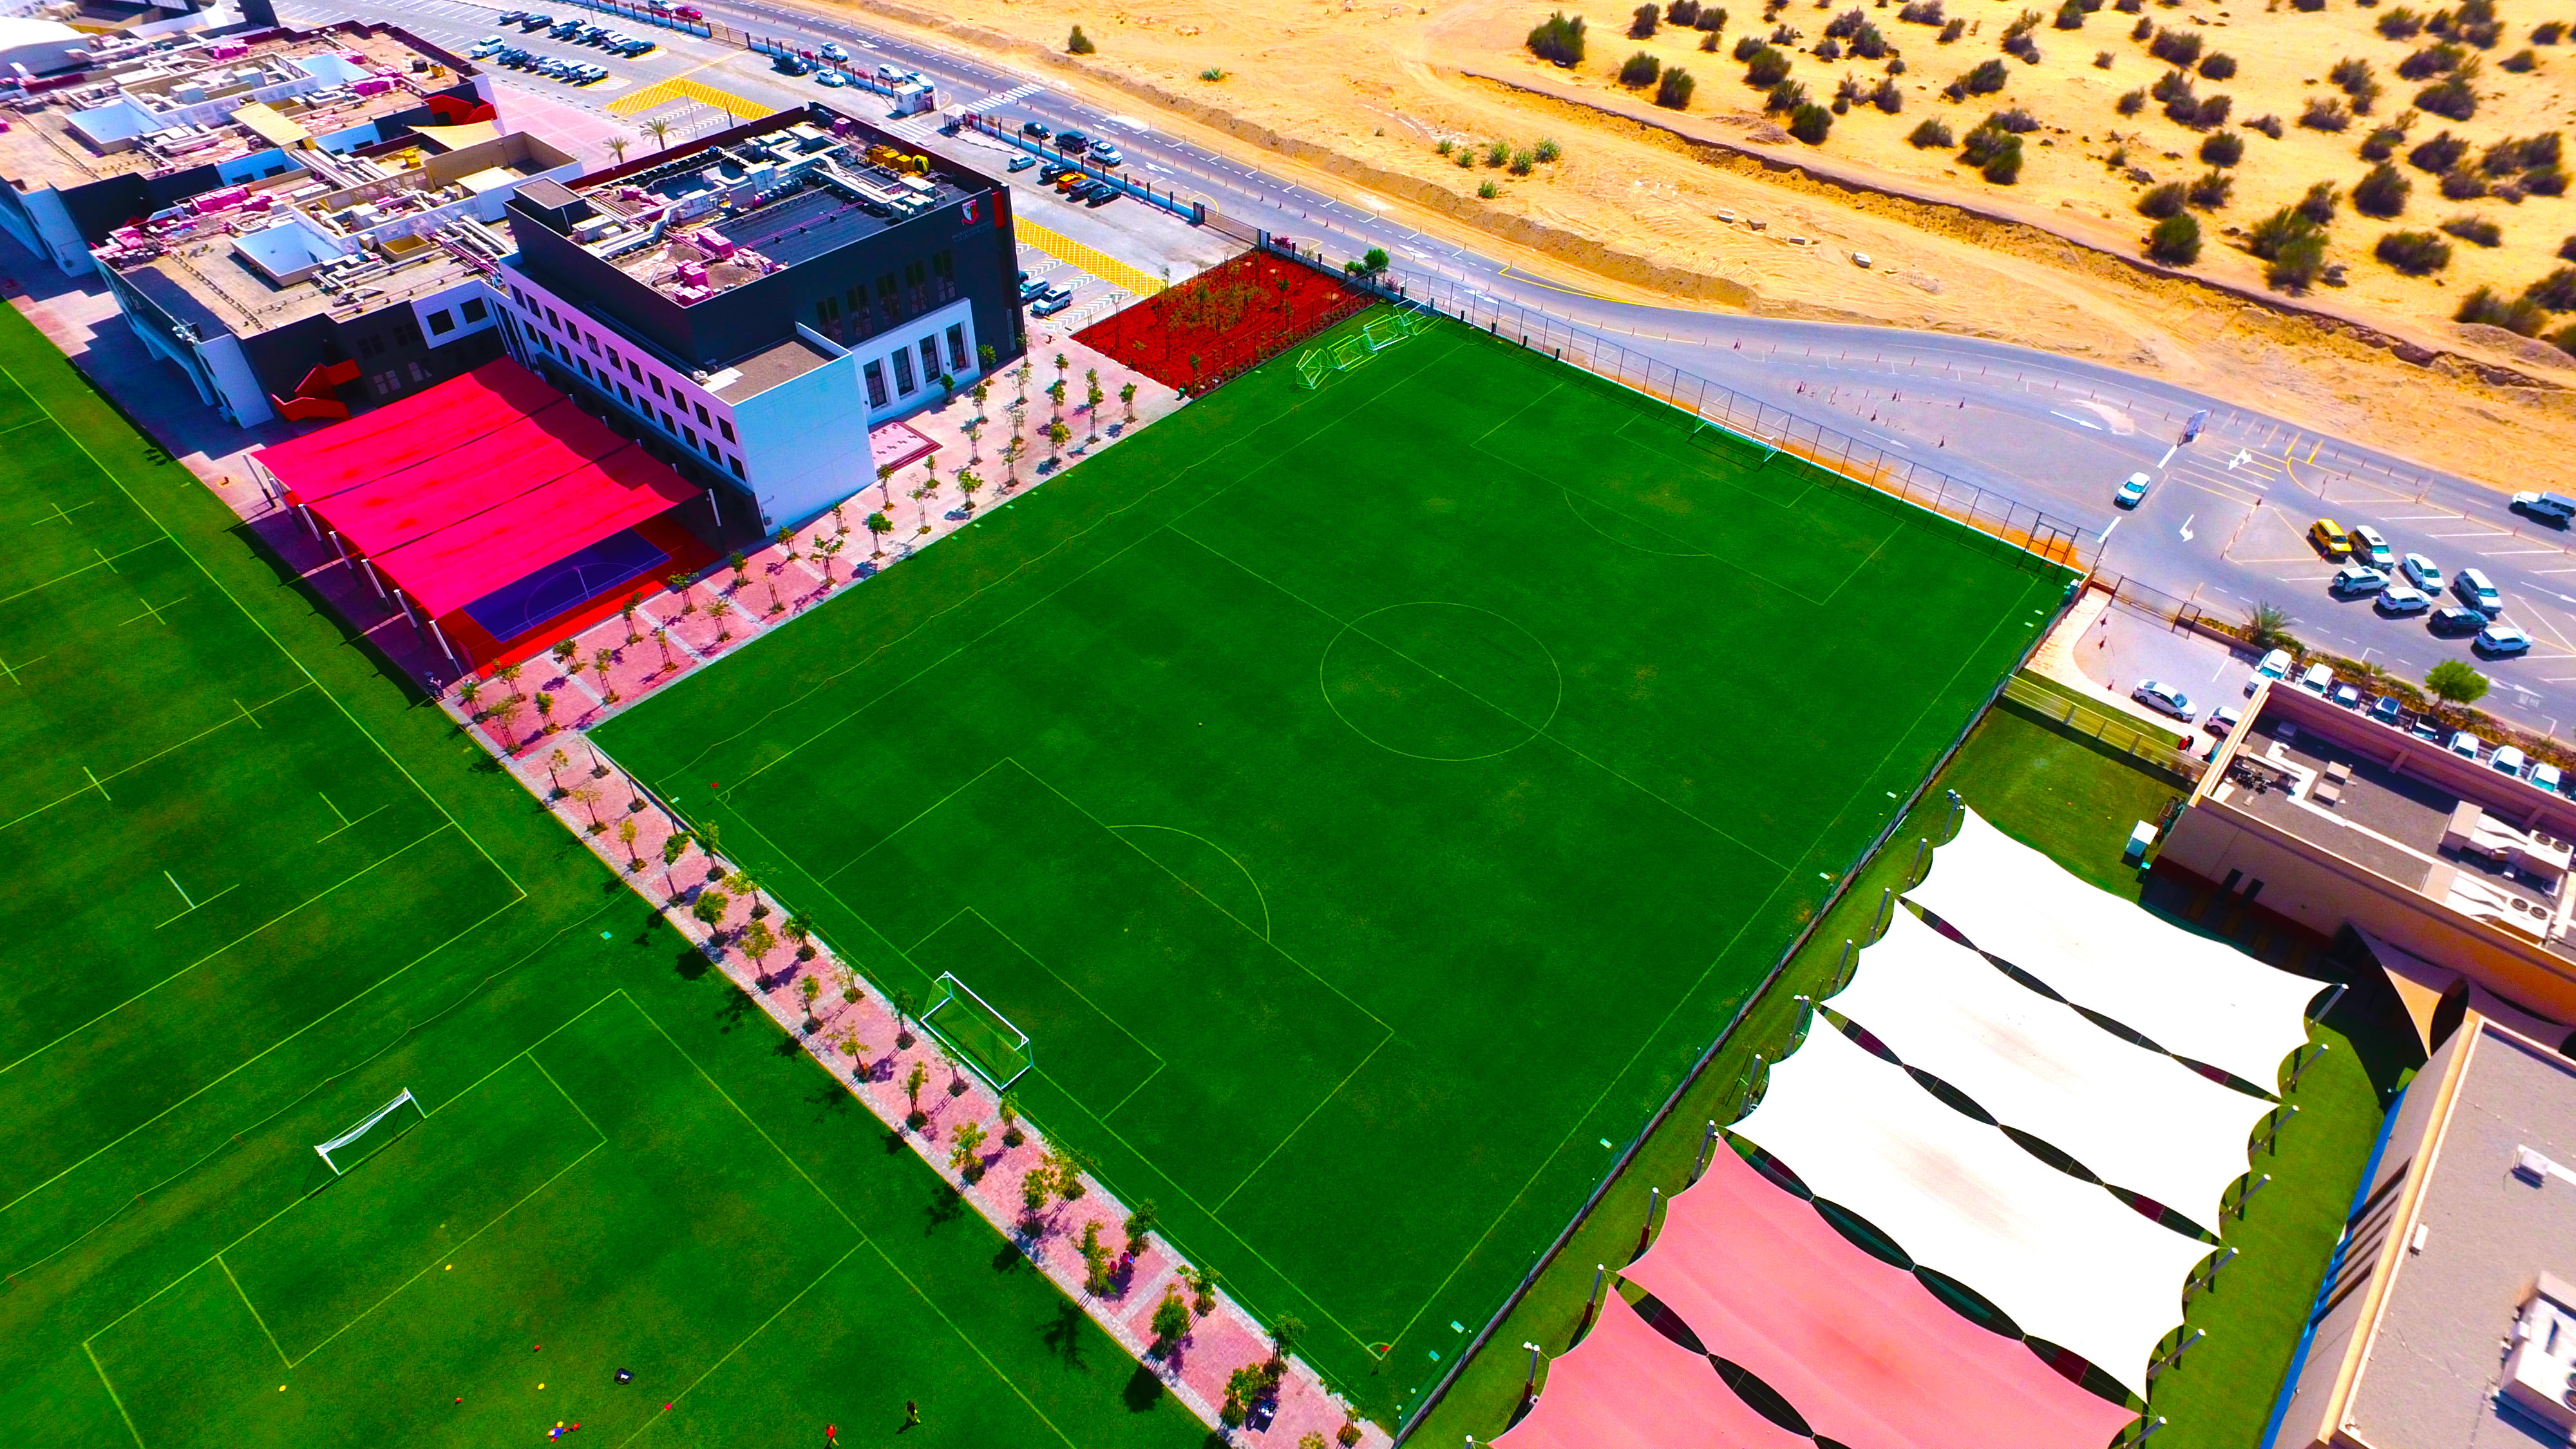 Sporting facilities at DESC Dubai English Speaking College are outstanding as highlighted by this aerial short of the school